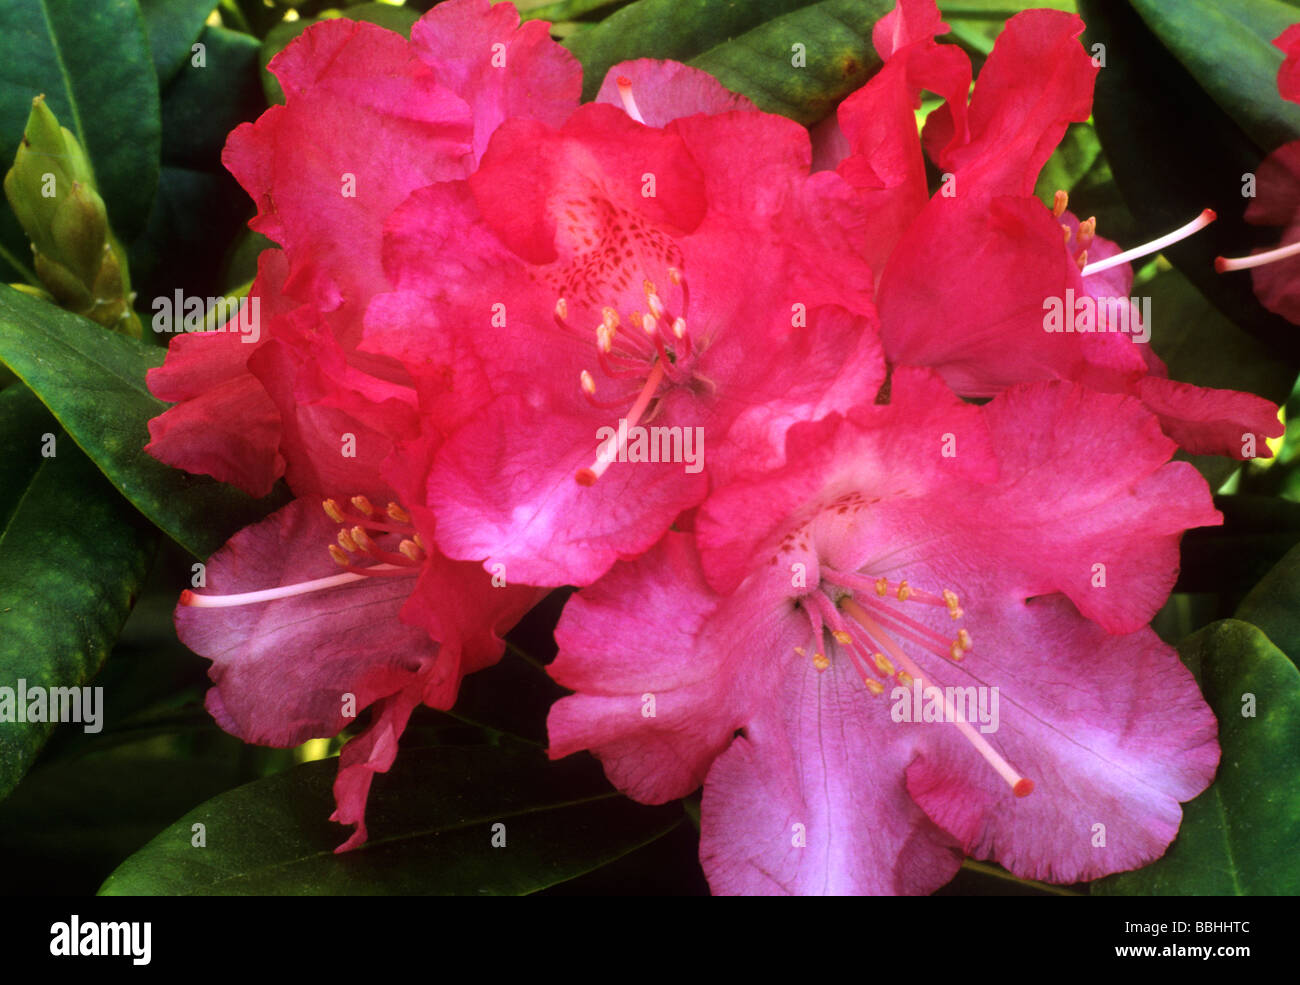 Rhododendron 'Hachmann's Marlis' red flower flowers garden plant Stock Photo